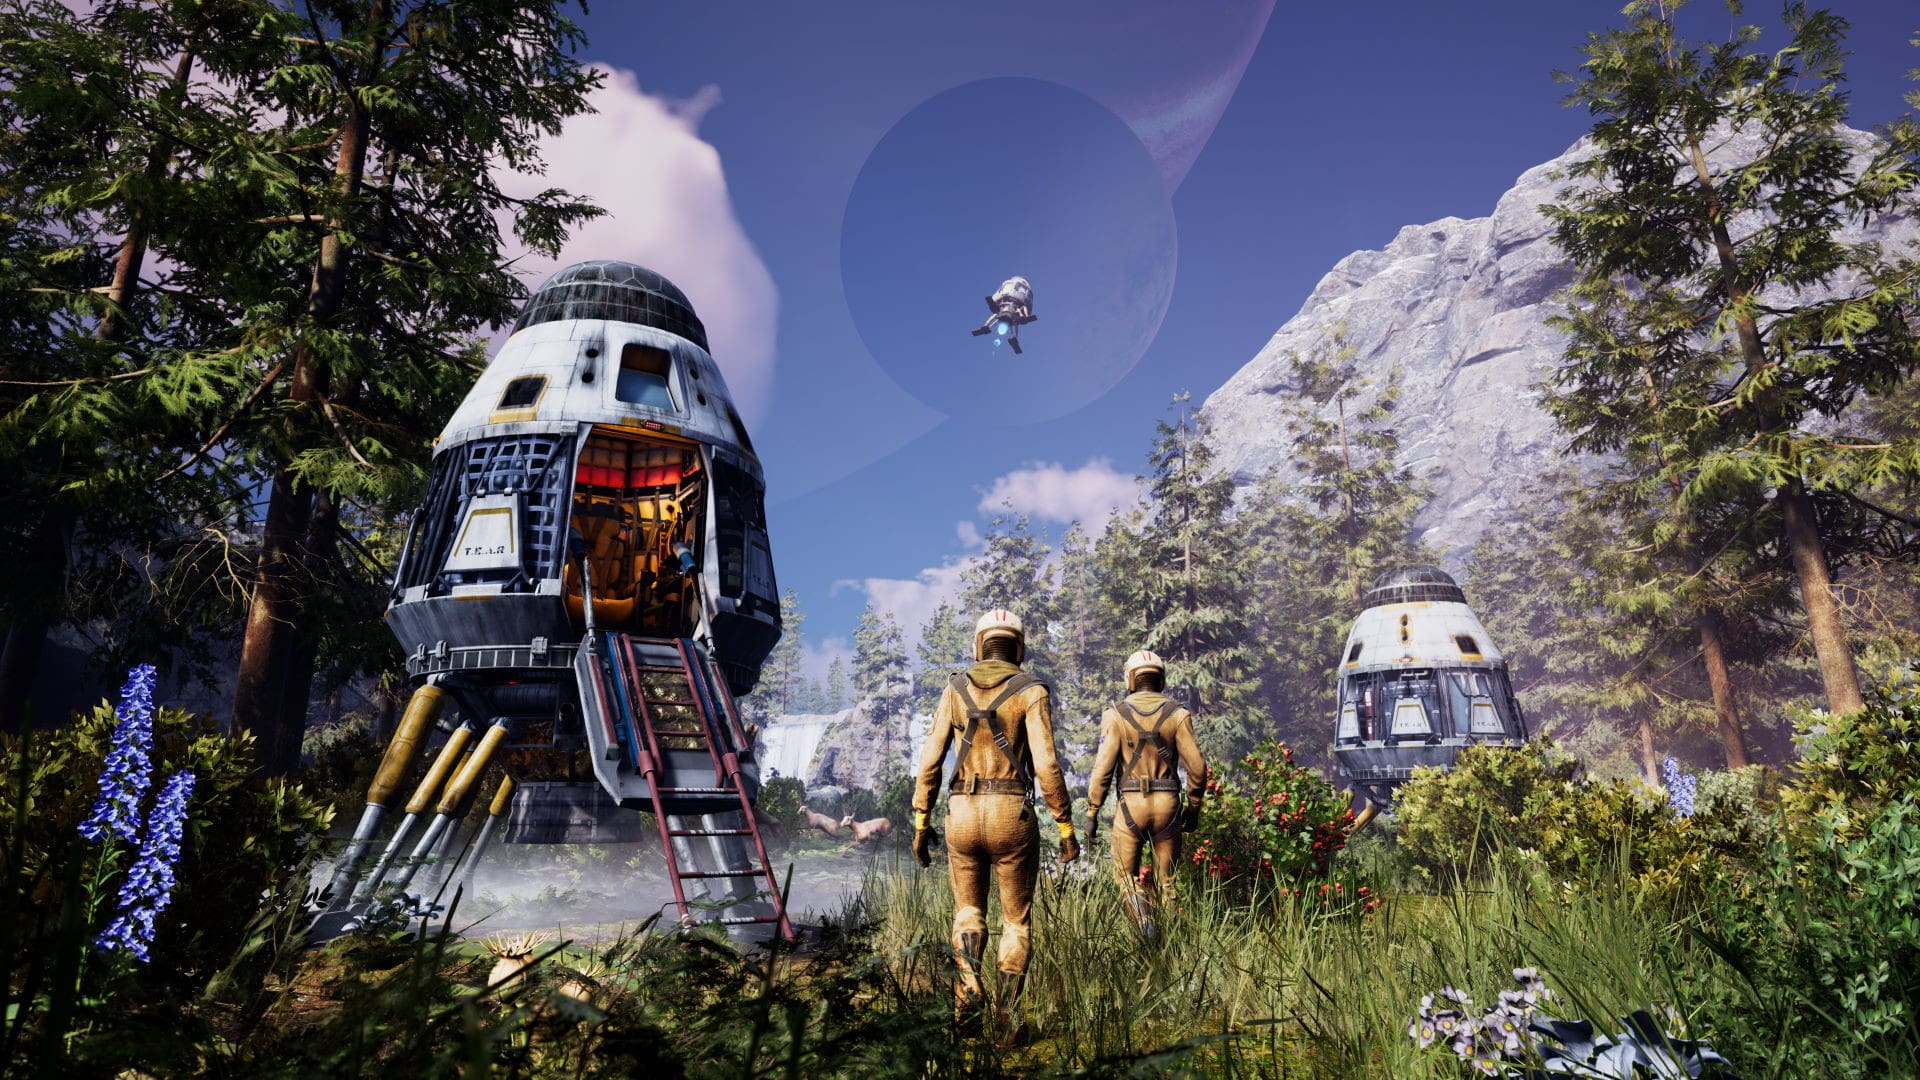 Gameplay image of Icarus, highlighting its survival mechanics in a lush, hostile environment